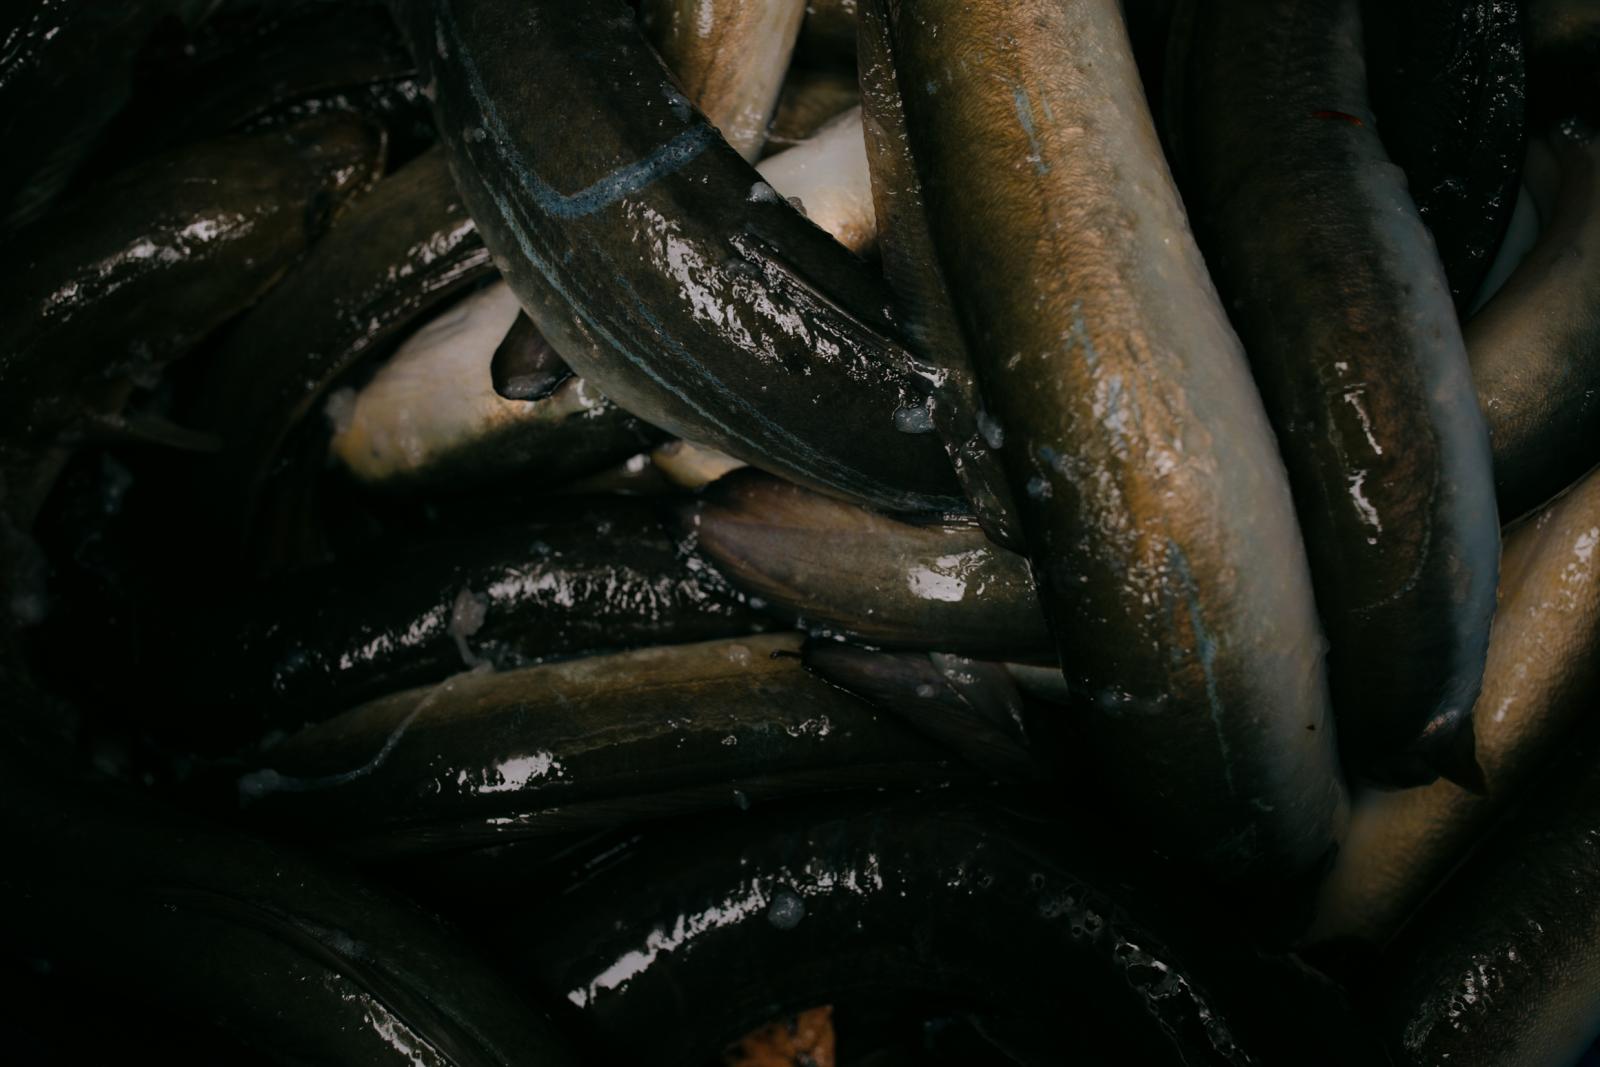  A bucket holds several dozen e... from the eels before smoking. 